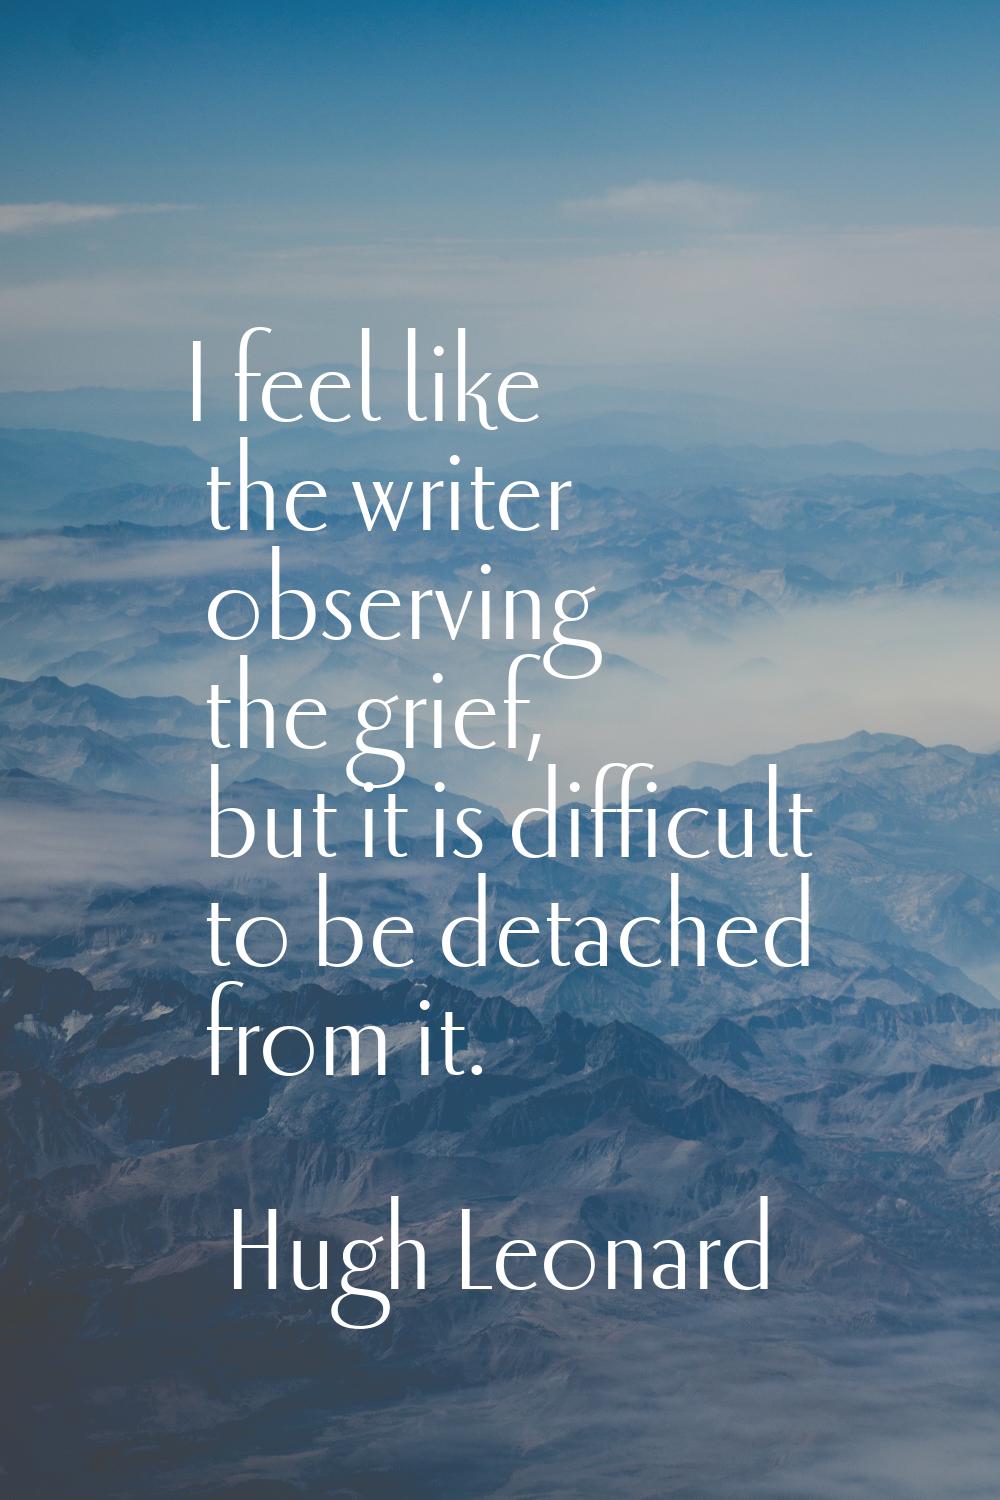 I feel like the writer observing the grief, but it is difficult to be detached from it.